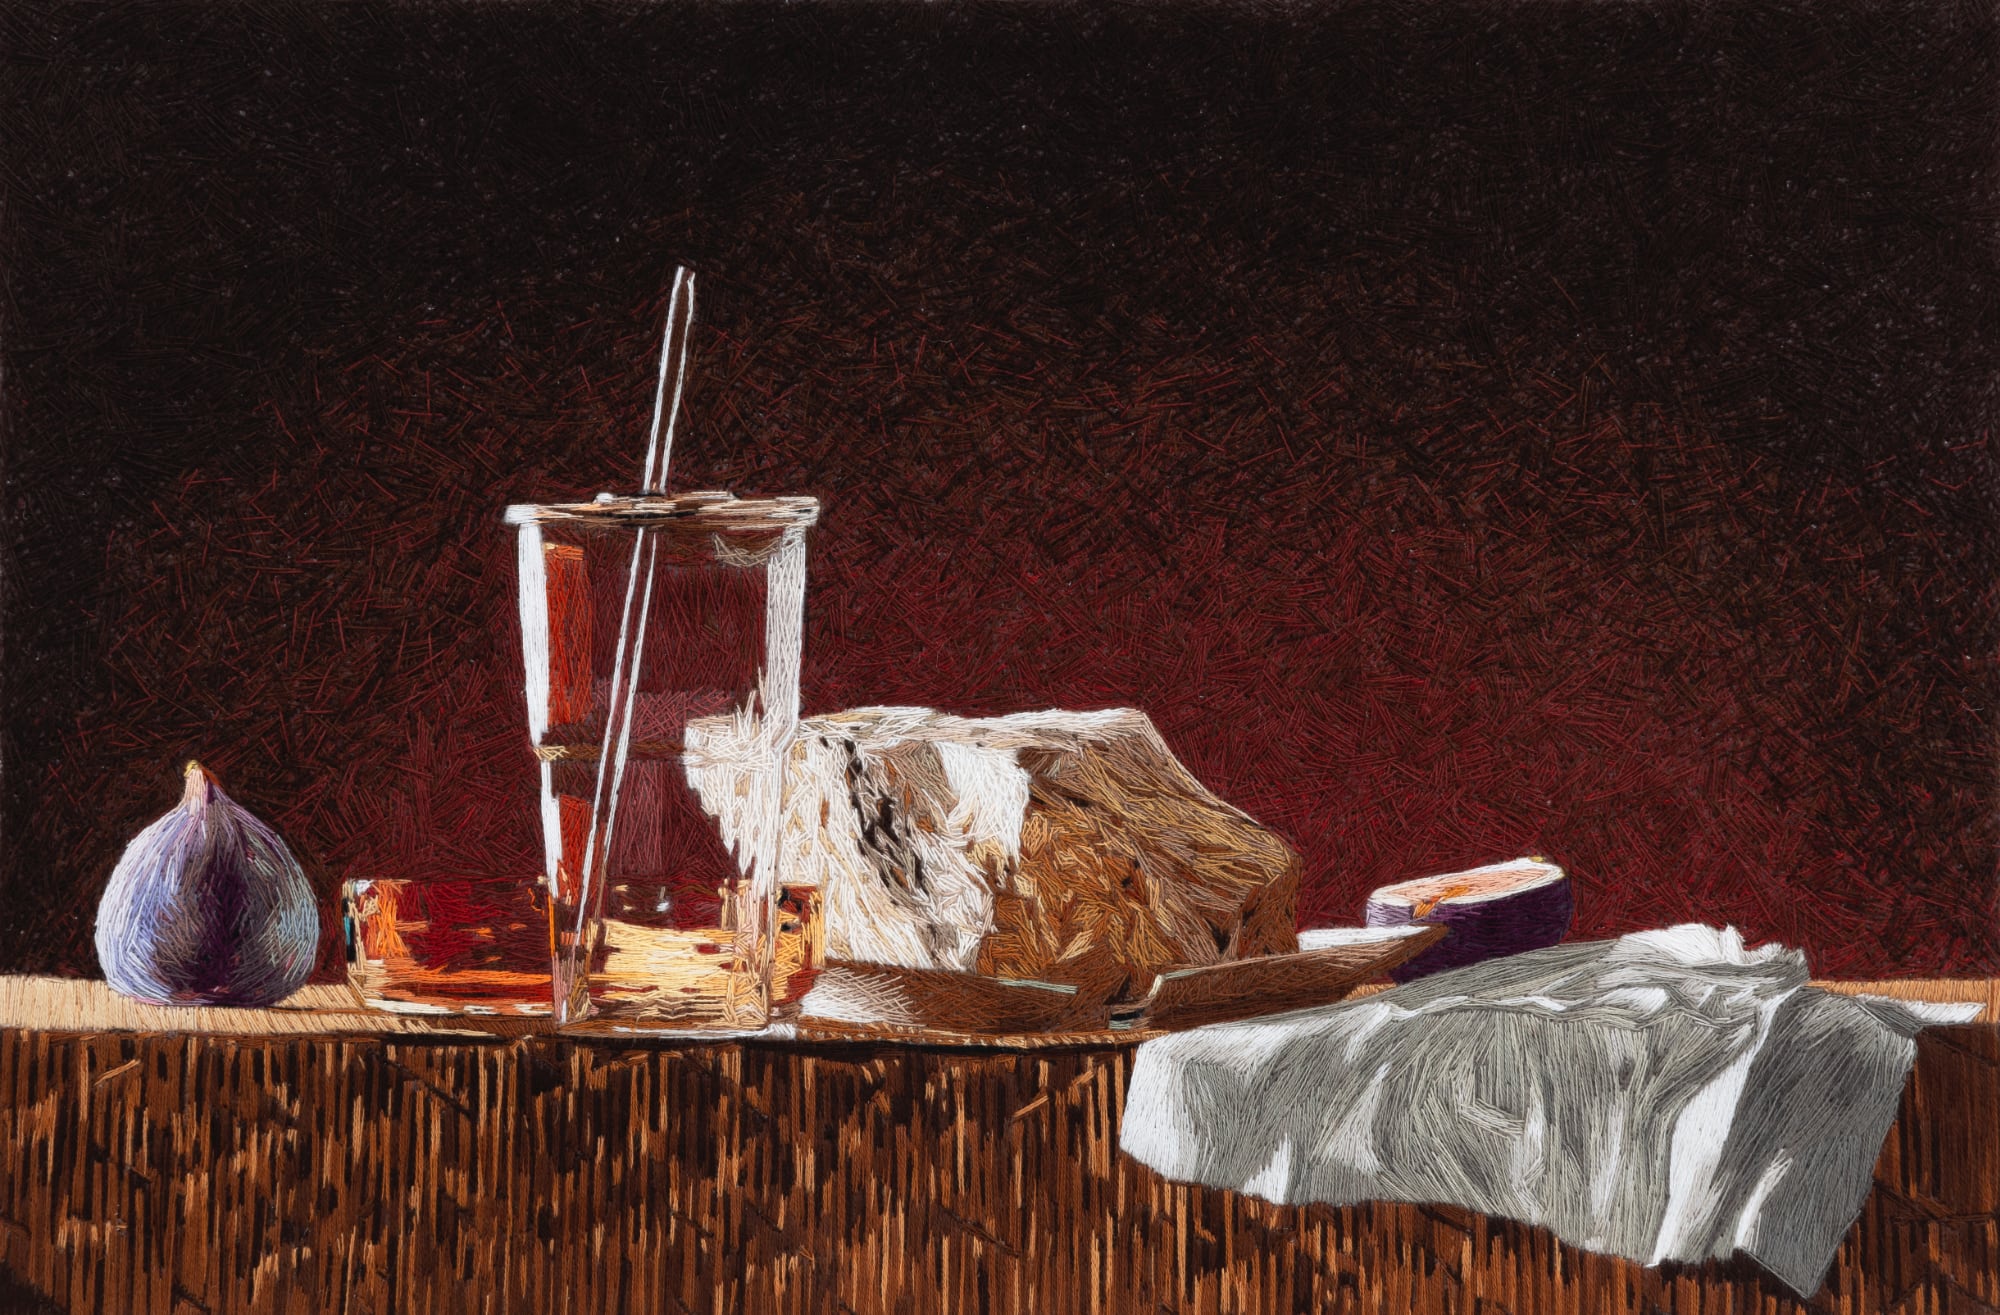 A still life of a cup with a straw, figs, bread, and a cloth.